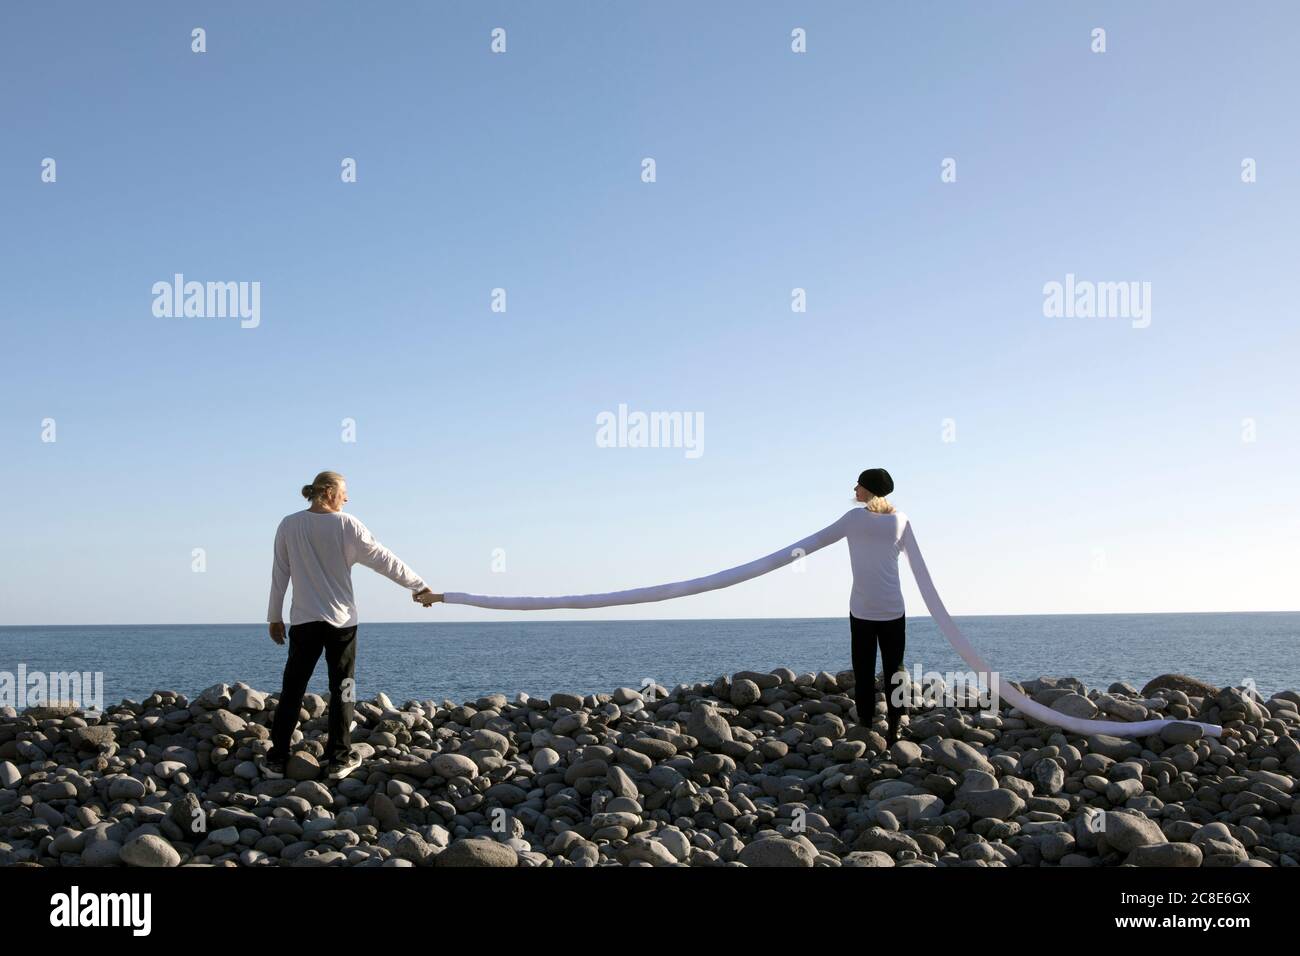 Woman with long arms holding man's hand at beach against clear sky Stock Photo